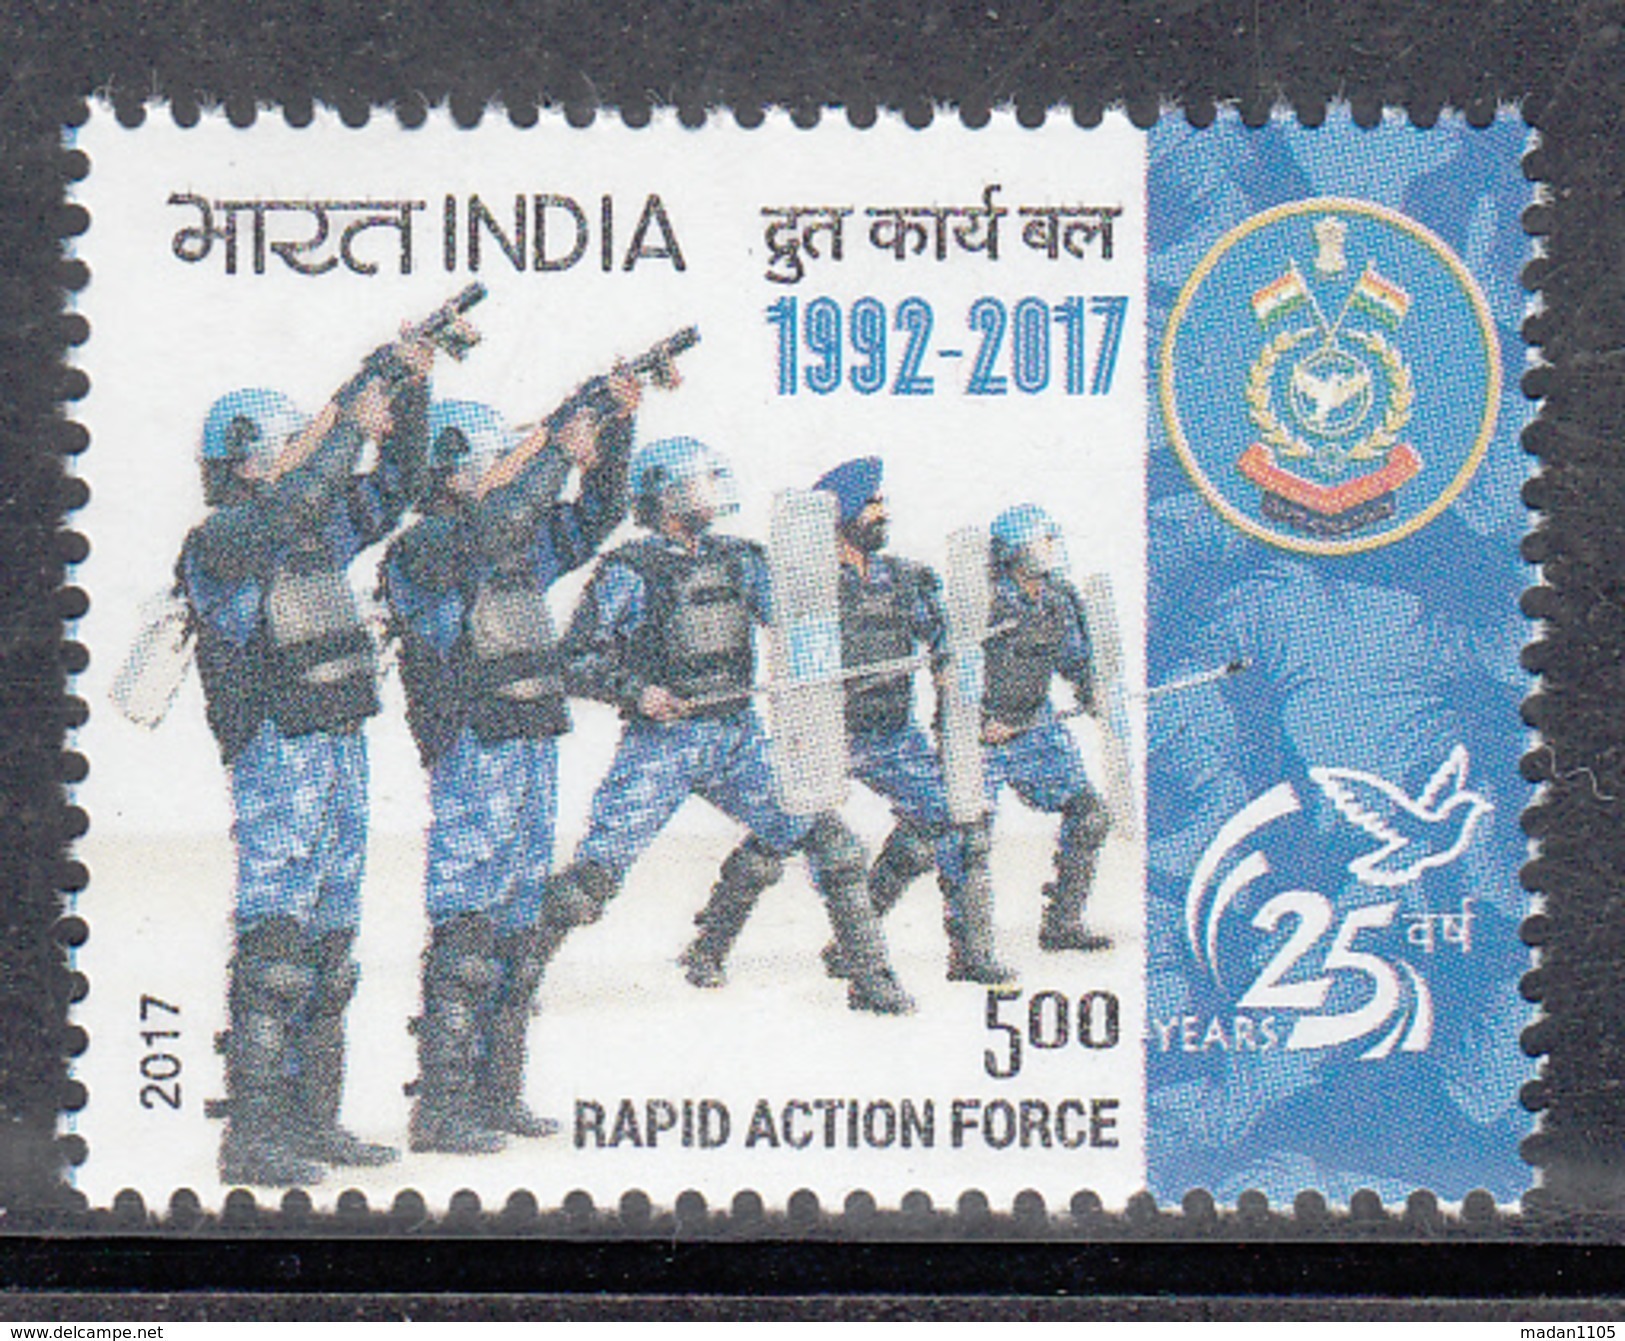 INDIA, 2017, Rapid Action Force, Mititaria, Armed Force, 1v, MNH (**) - Neufs